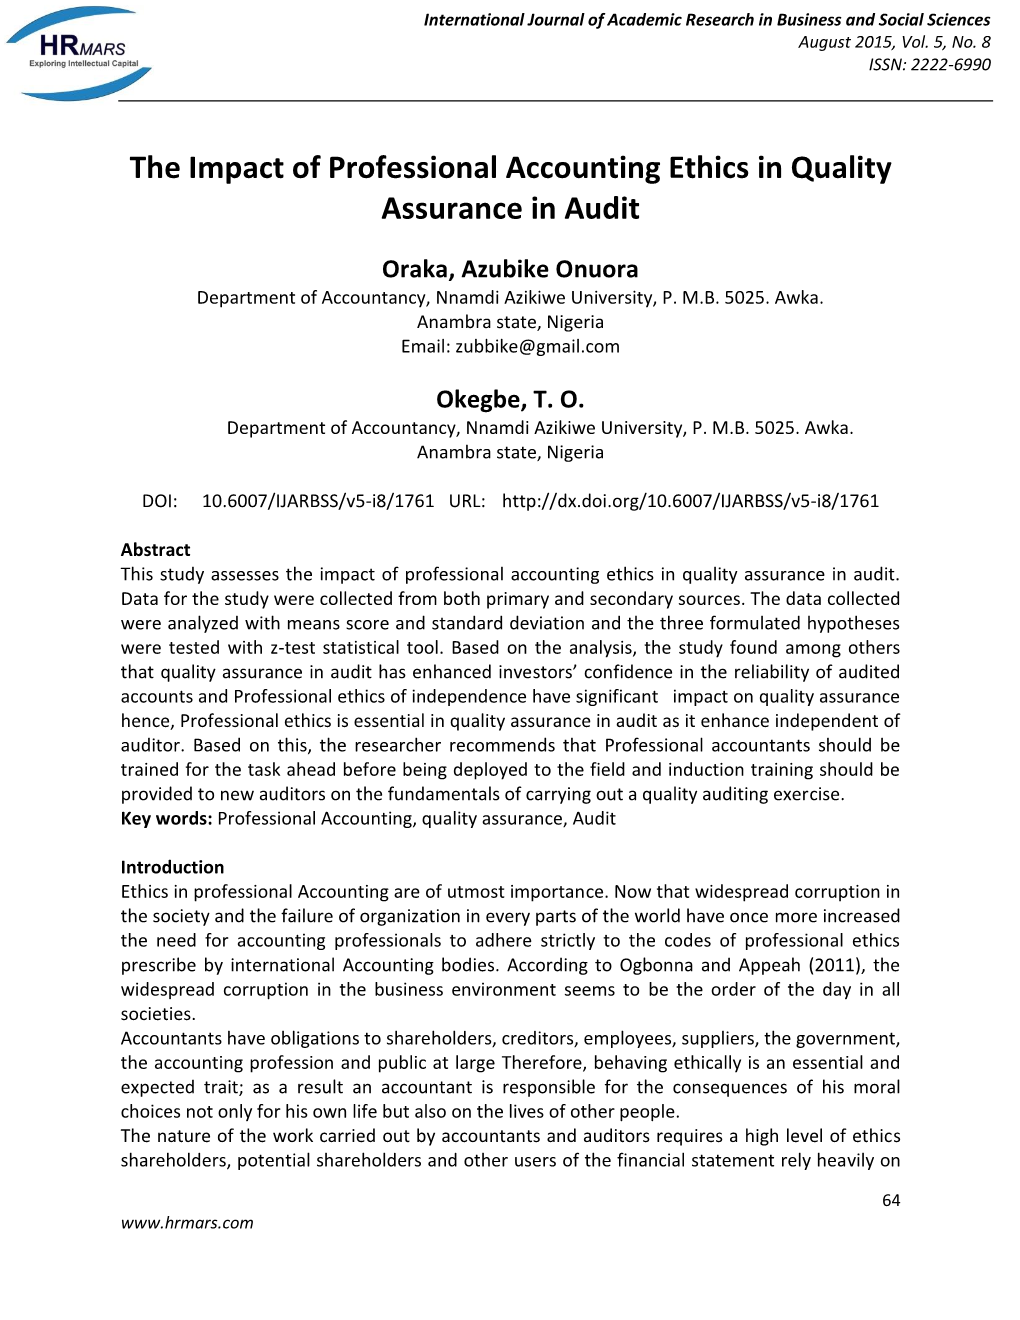 The Impact of Professional Accounting Ethics in Quality Assurance in Audit